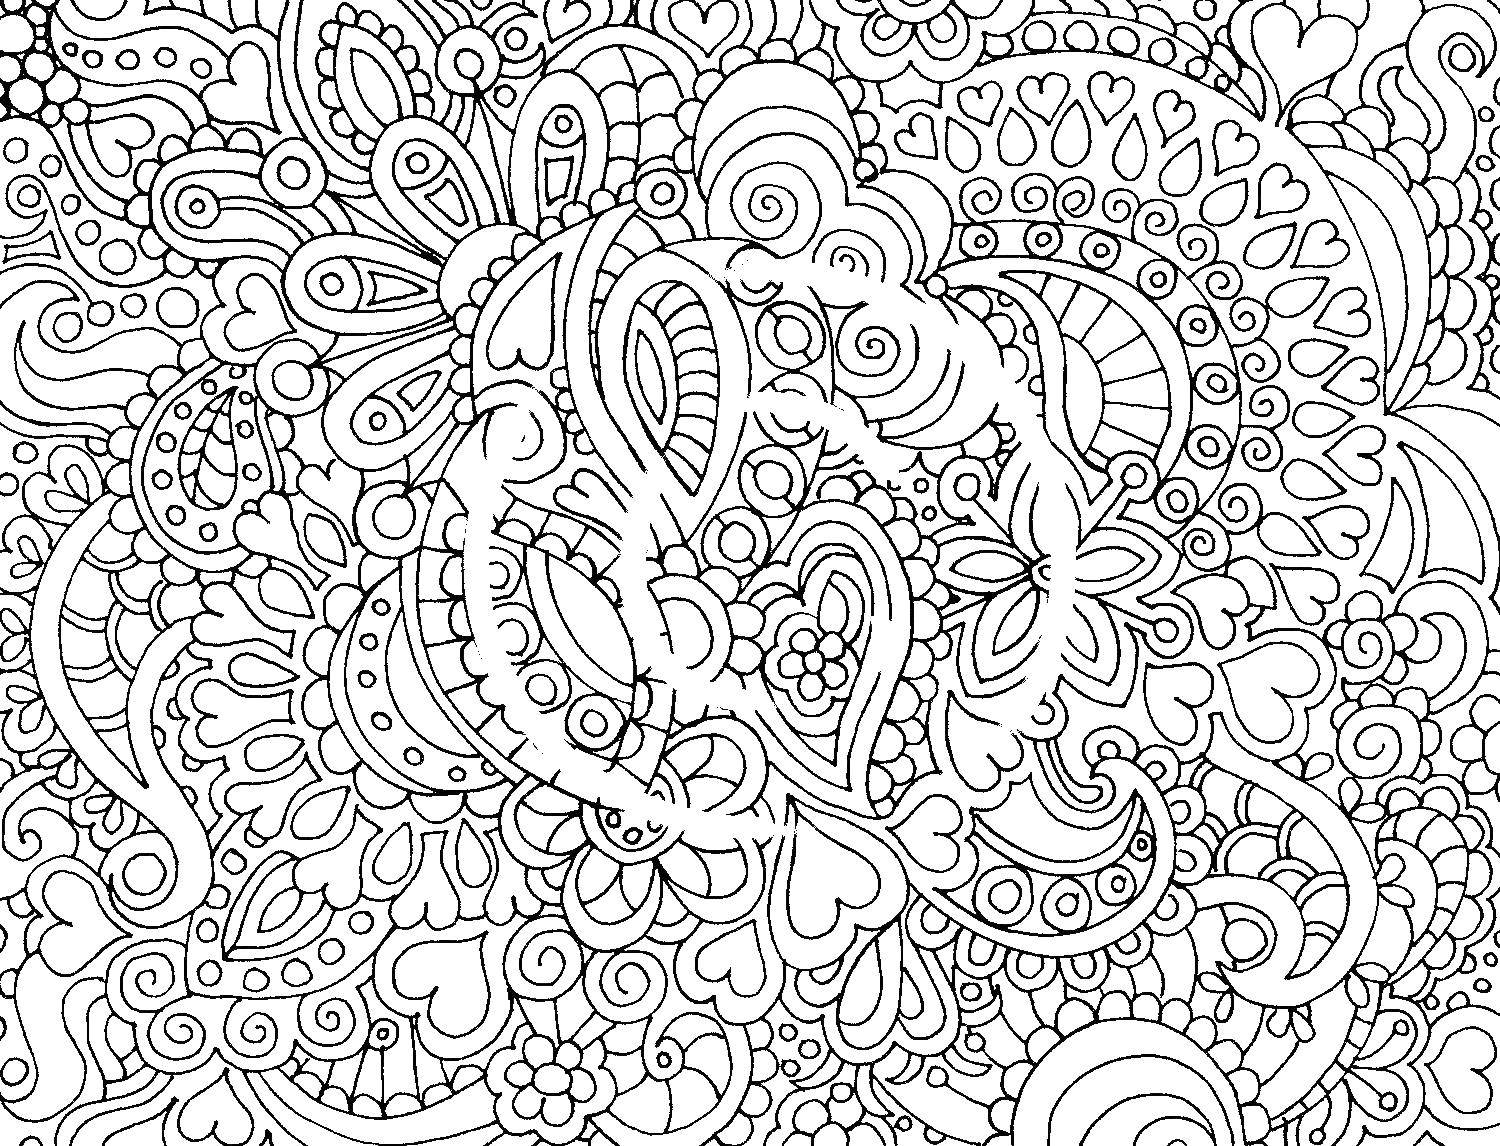 Coloring Pattern with hearts. Category patterns. Tags:  Patterns, flower.